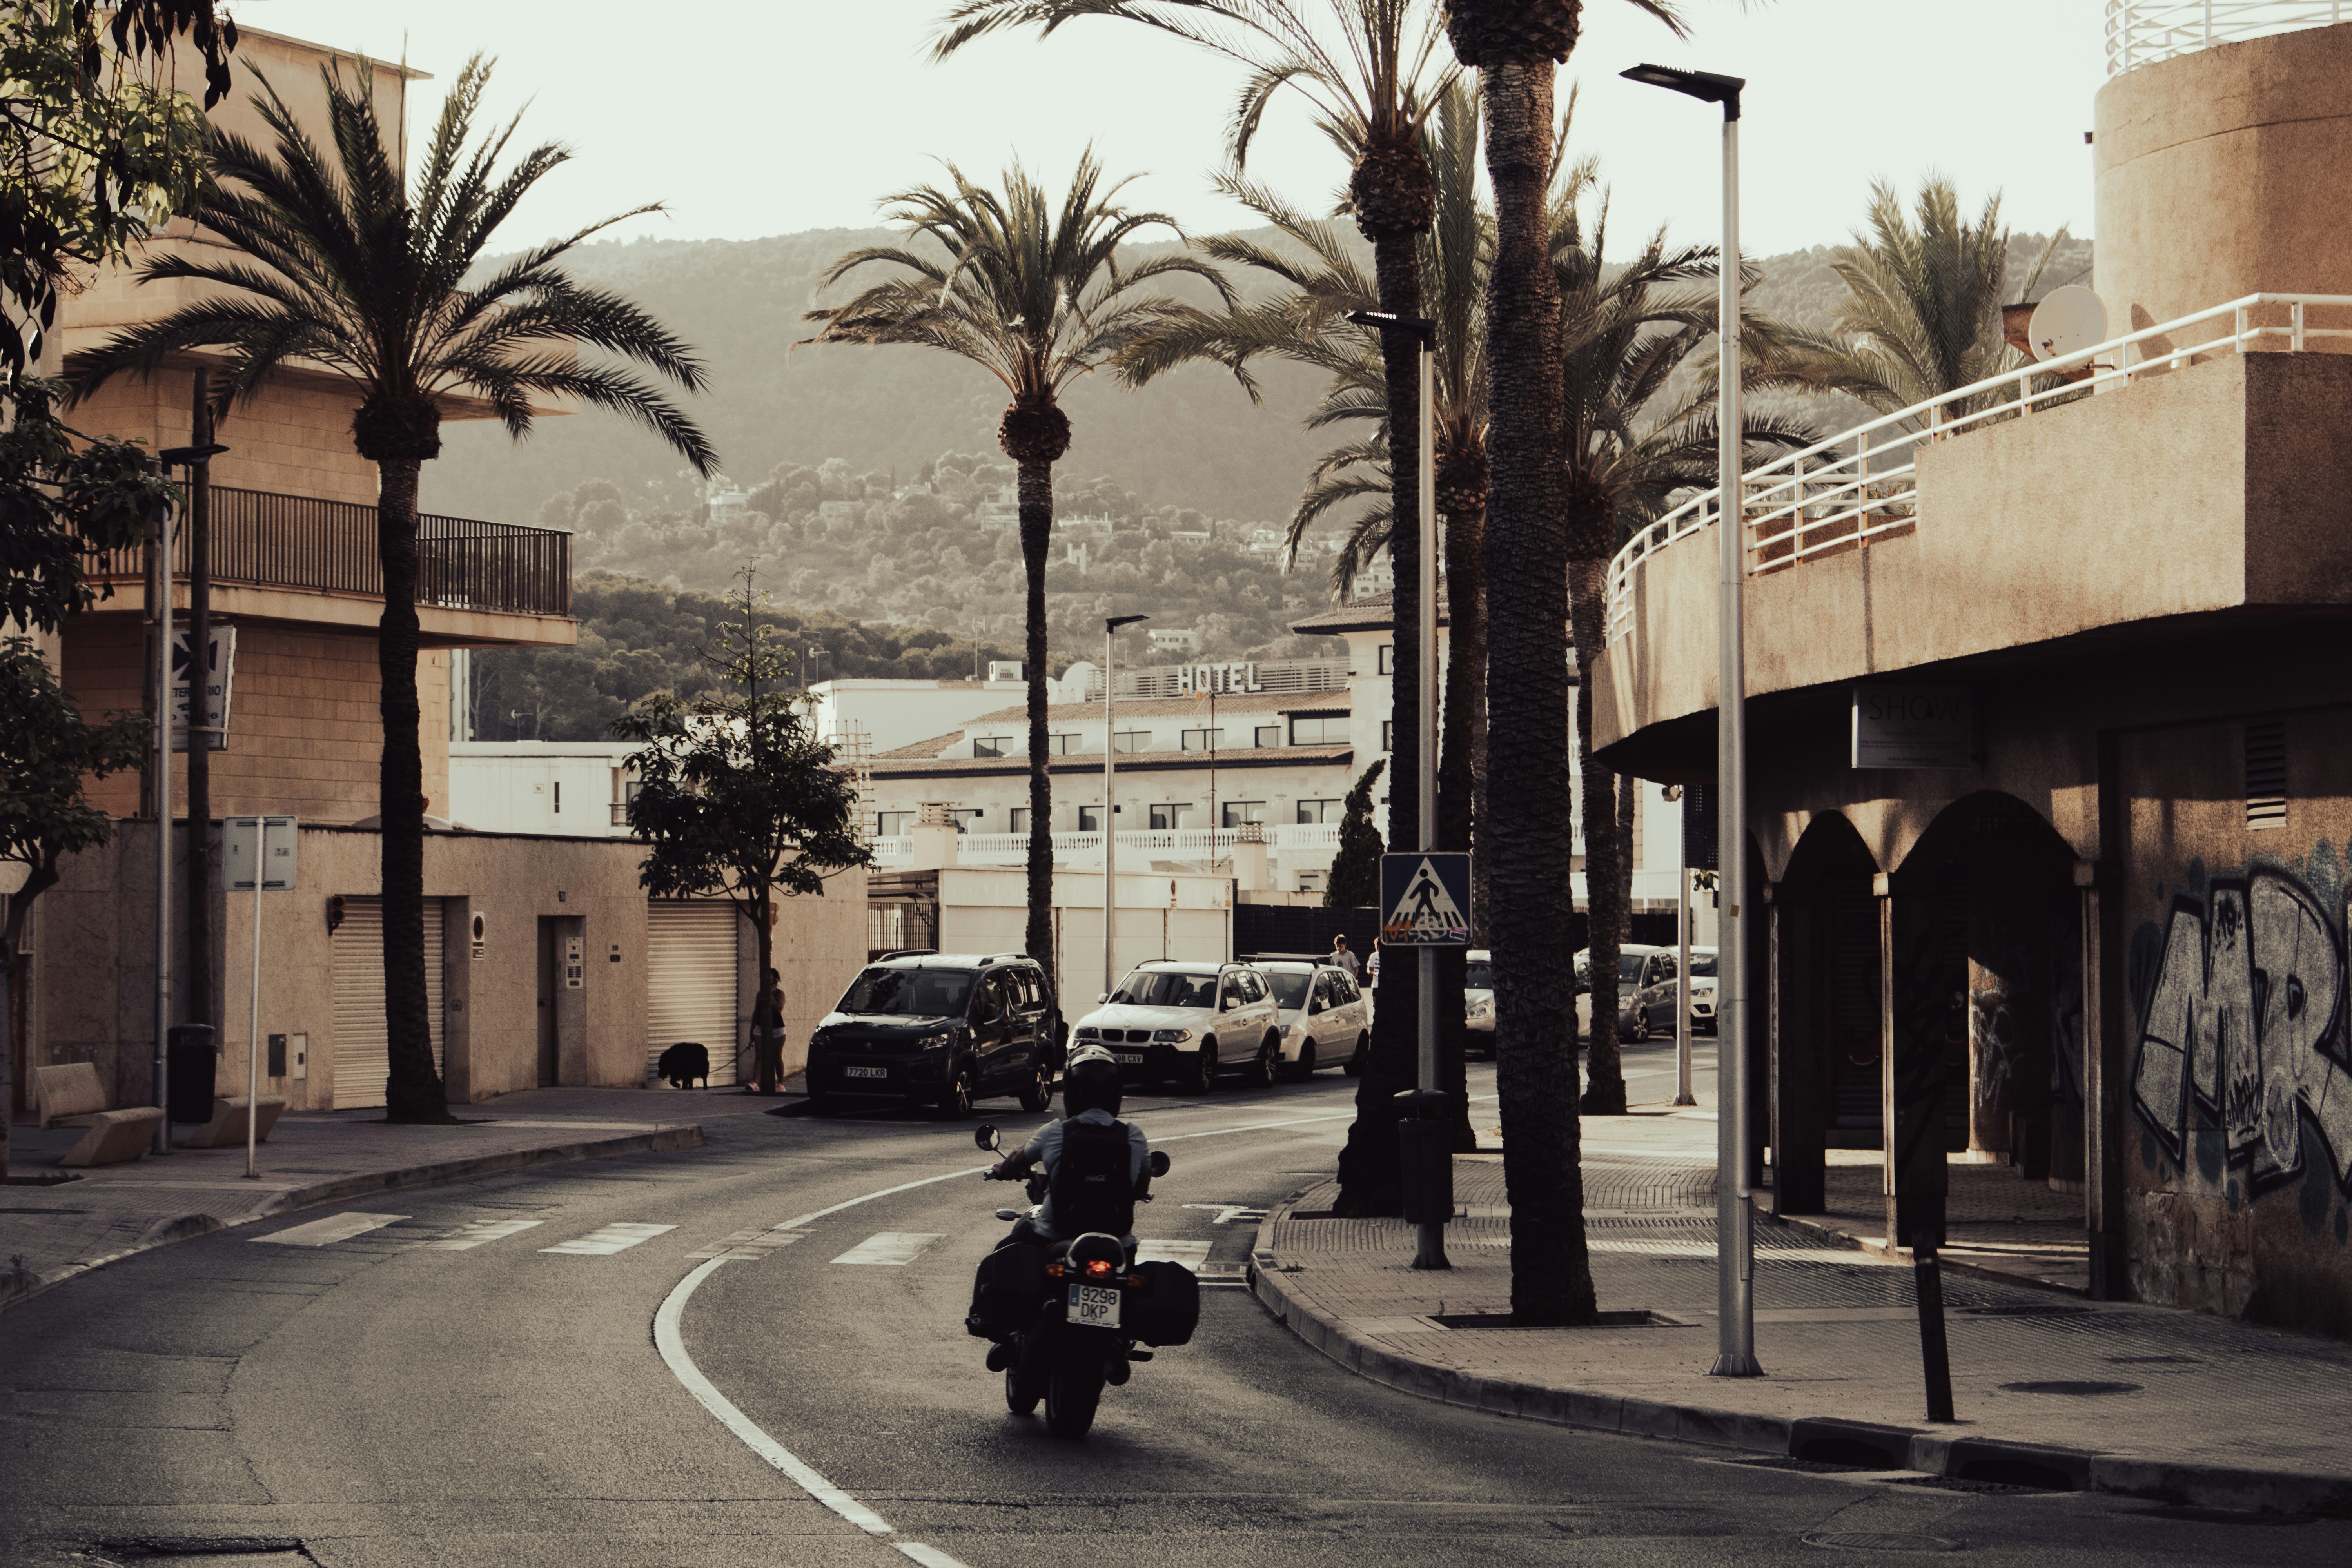 Cinematic photo of a motorcycle riding down a road